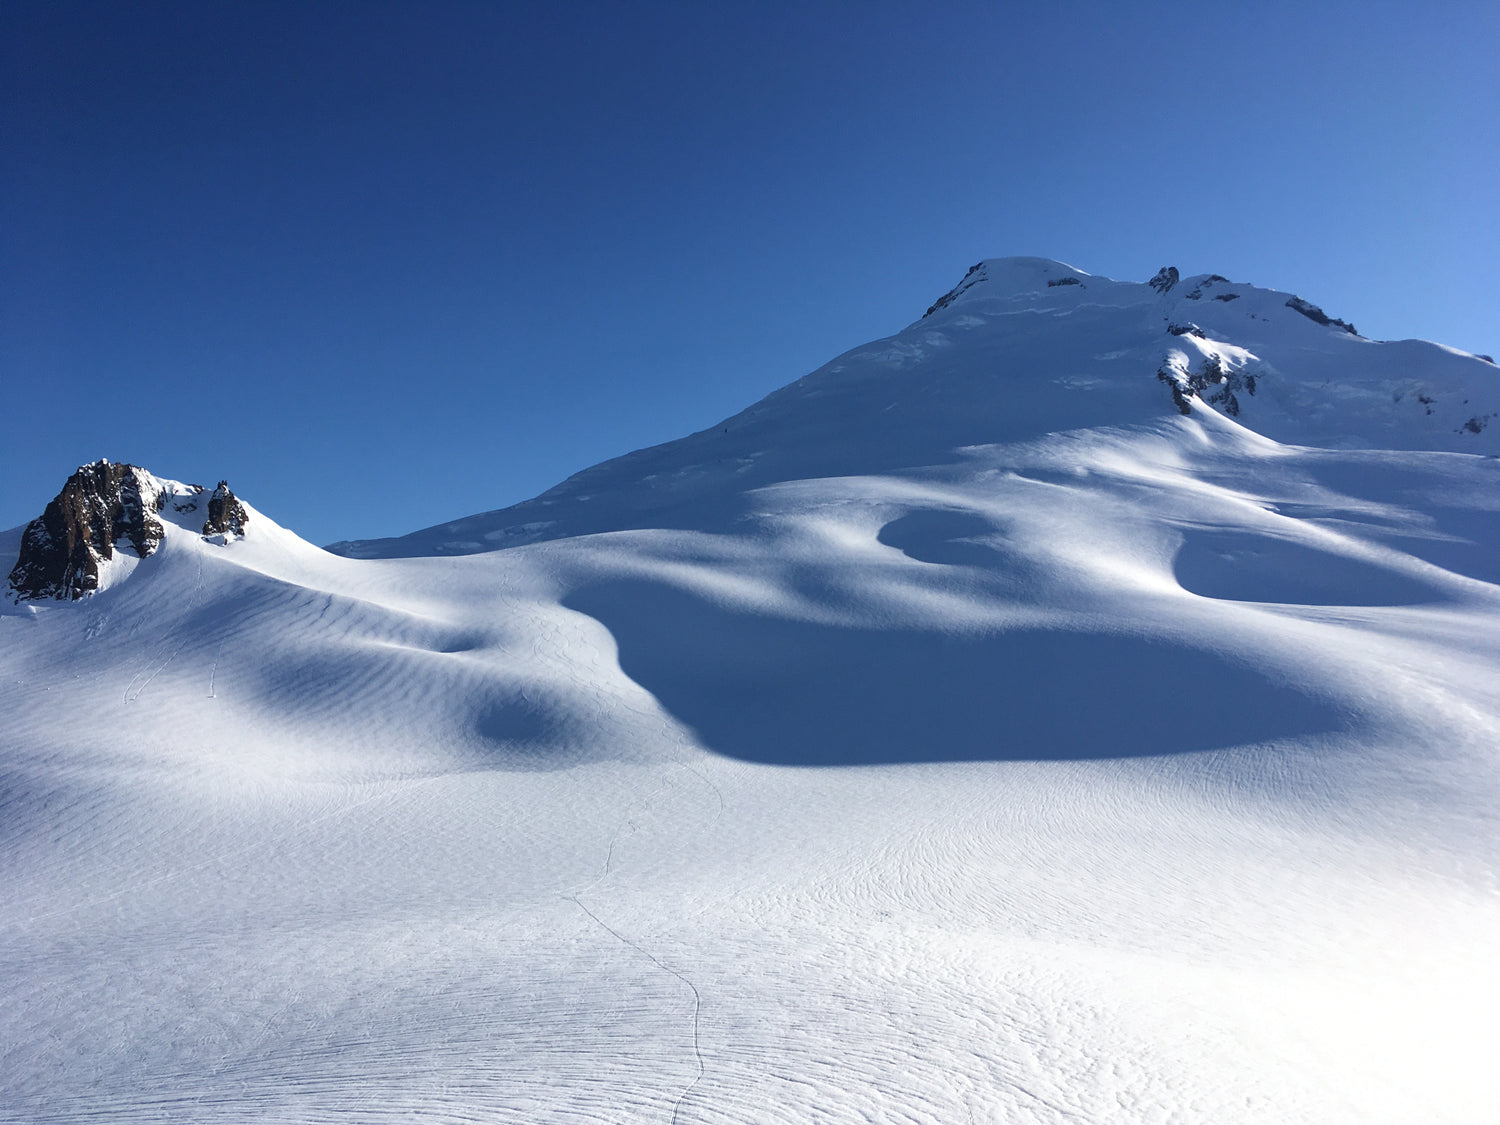 Ski tracks on the slopes of Mount Baker on a clear day. 